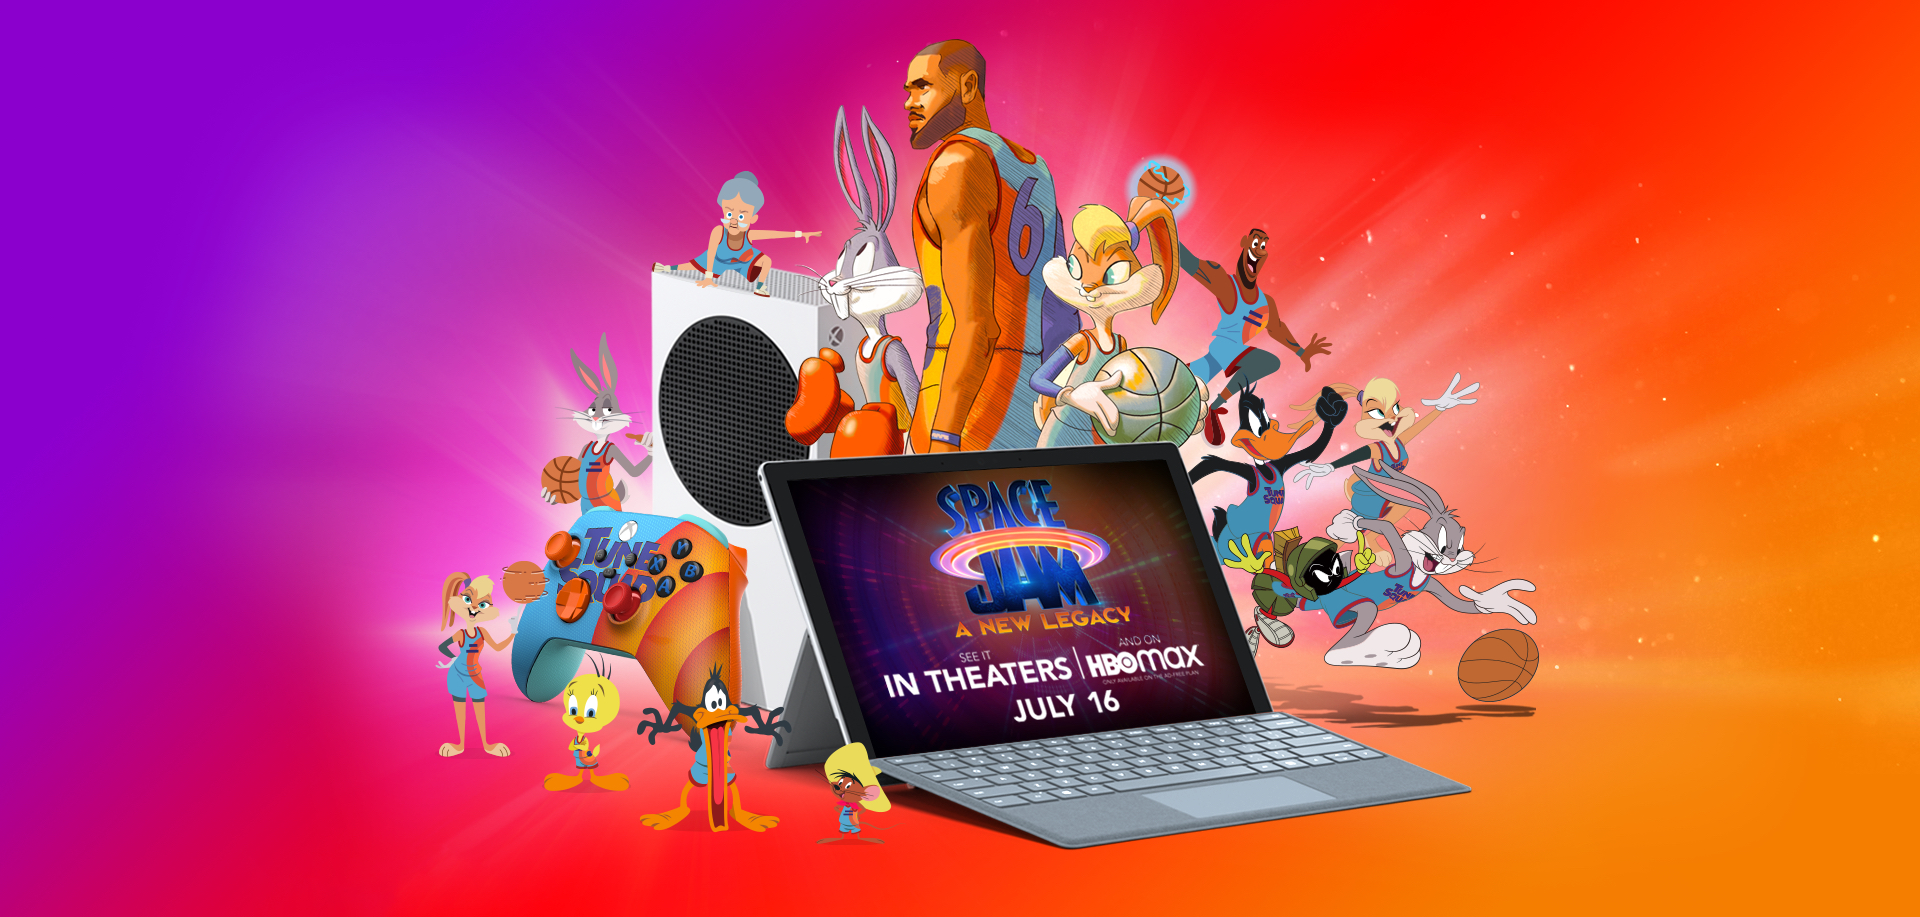 Build your own legacy with Space Jam. Microsoft In Culture